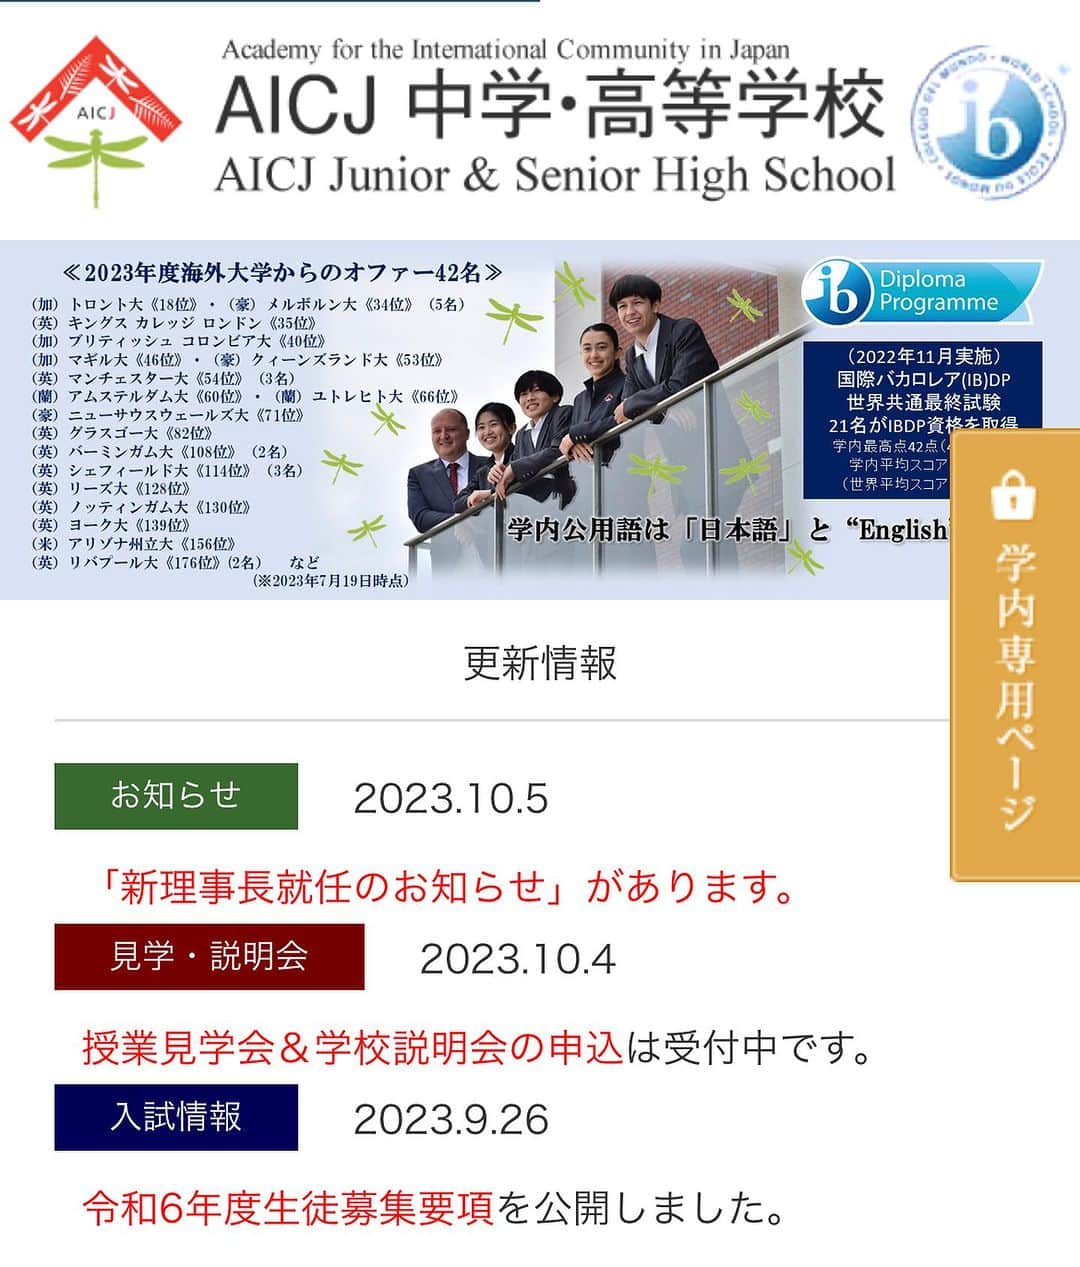 田中彩子さんのインスタグラム写真 - (田中彩子Instagram)「. I have been appointed as the new Chairman of the Board of Directors of AICJ Junior & Senior High School! AICJ, which became the first IB (International Baccalaureate) accredited school in western Japan in 2009, stands for "Academy for the International Community in Japan," AICJ is a school that aims to nurture international elites who can play an active role in the global society.  AICJ produces many elite students every year, and I am surprised and honored to be appointed as the new chairman of such a wonderful school.  【お知らせ】 学校法人AICJ鴎州学園の新理事長に就任致しました。 2009年に西日本で初めてIB(国際バカロレア)認定校になったAICJは、「Academy for the International Community in Japan」の略で、「日本における国際社会のための学校」という意味を持ち、「グローバル社会で活躍できる国際的エリート」を育て上げることを目指している学校です。 その通り毎年沢山のエリートを国内外に輩出している素晴らしい学校で、そんな学園の新理事長に就任する事、自分自身もびっくりしていますが大変光栄です。  私自身10代からウィーンに住んで経験してきた事、今もヨーロッパと日本を行き来しながら感じている事を、音楽家ならではの目線で学生達にダイレクトに伝えていきたいと思います。 より柔軟に世界を身近に感じて頂き、自由に羽ばたくサポートになれればと願います。 @aic_oshu @aicj_hiroshima  着付け師: 山崎真紀@nonno1125 #田中彩子」10月8日 14時10分 - ayakotanaka_instaofficial